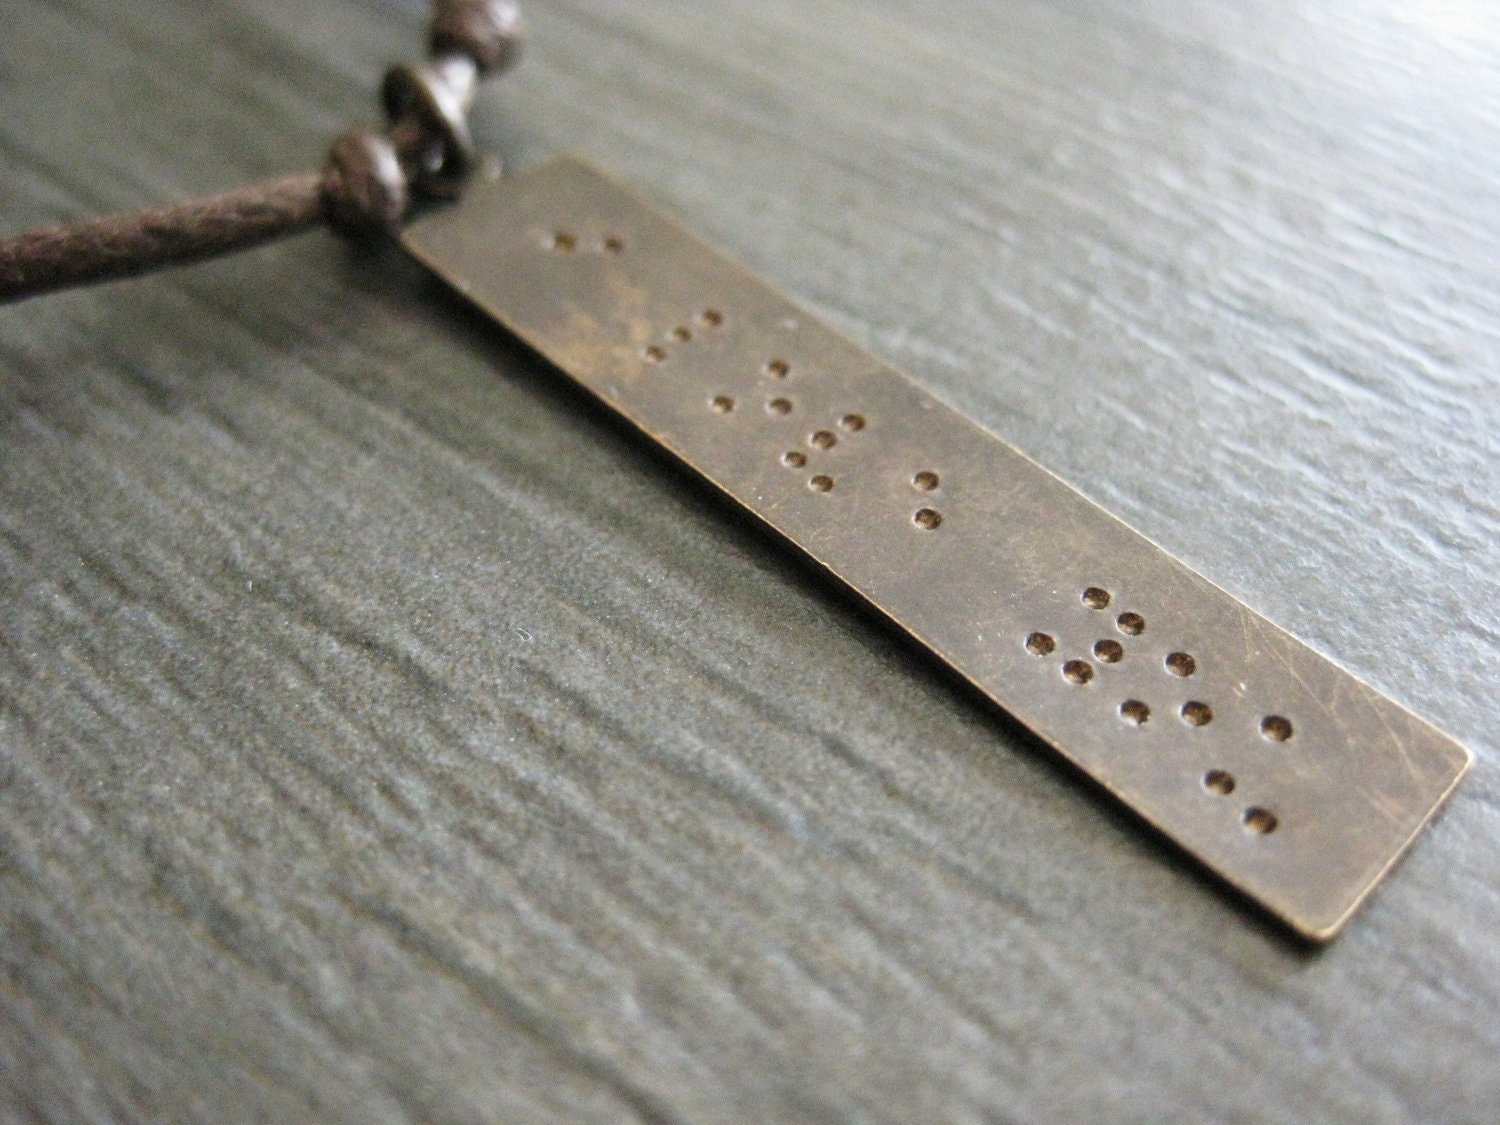 Braille 'I LOVE YOU' stamped long Brass Pendant Necklace for men or women,  Anniversary Gift, Wedding Day, Boyfriend, Husband, MN 118